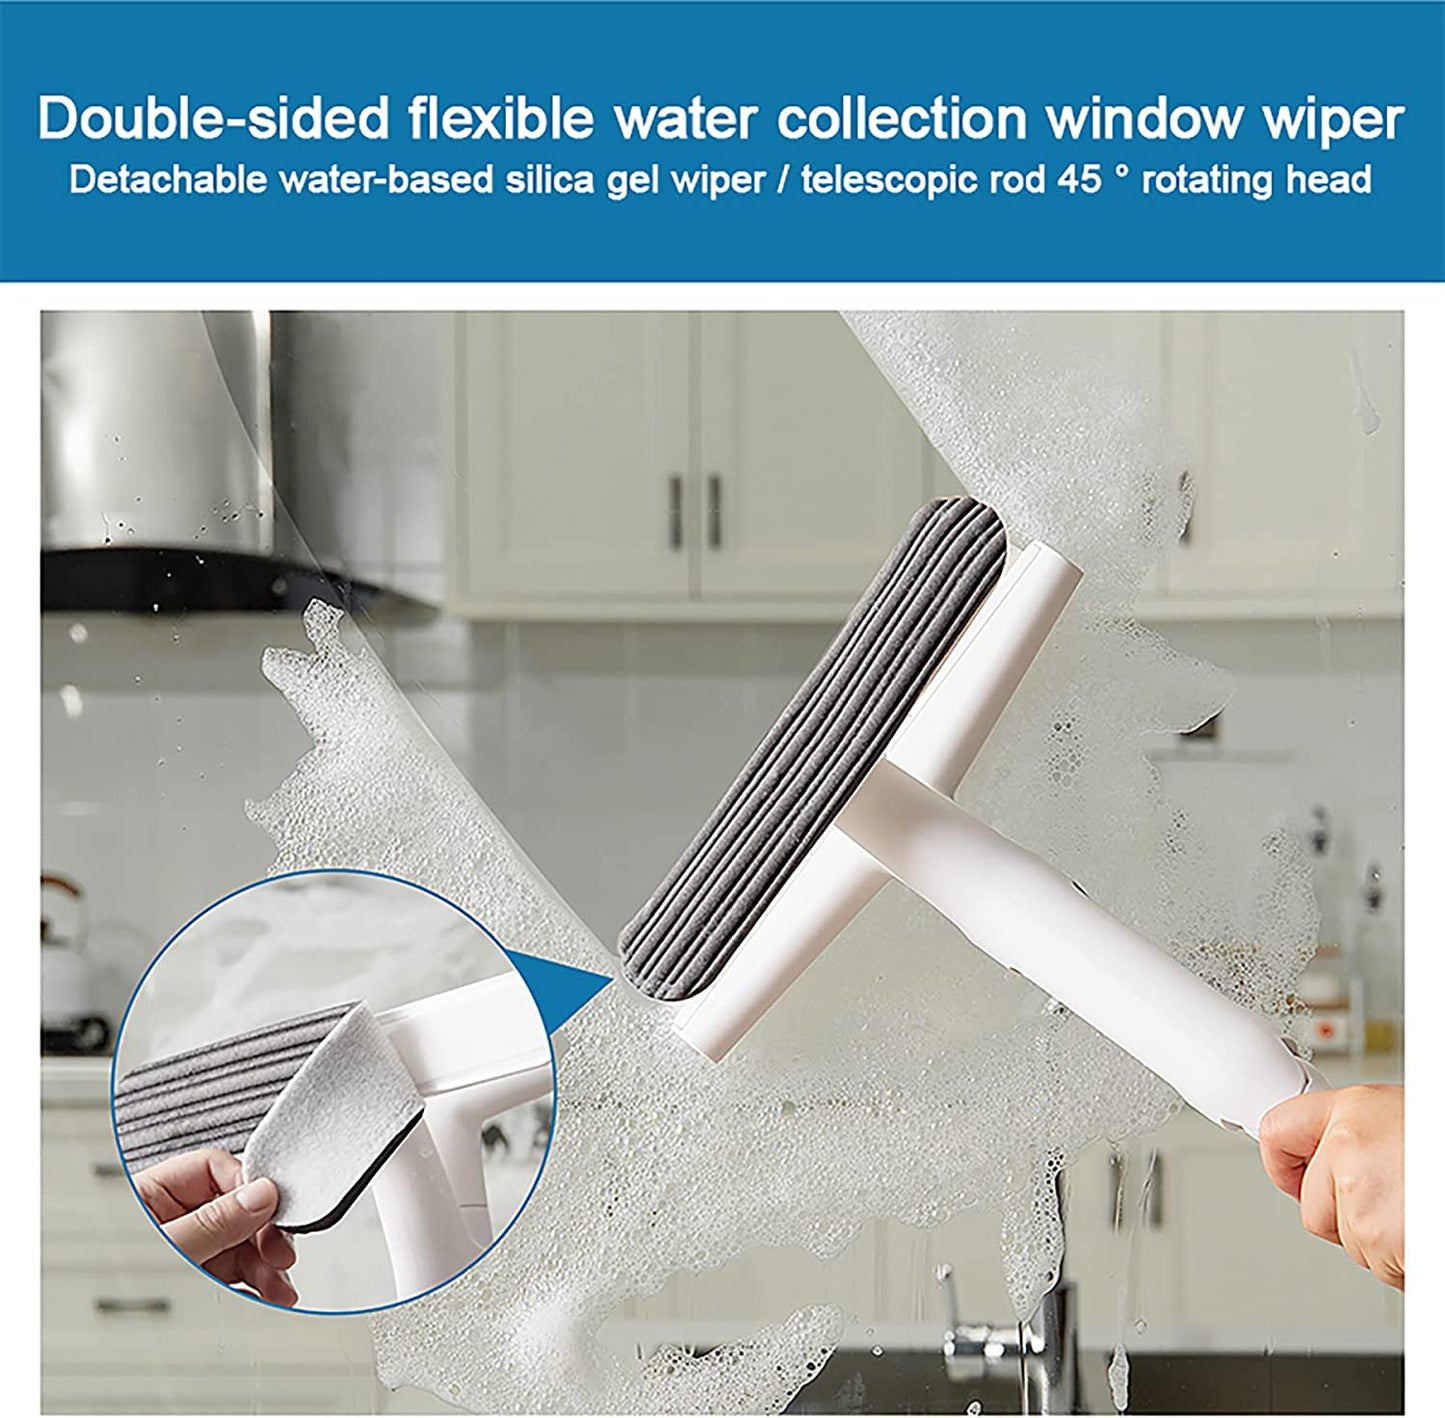 Eyliden Window Scrubber with Patent Water Collection System, Soft Silicone Squeegee & Sponge Window Scrubber and Sewage Catcher Bottle - 3 in 1 Window Cleaning Combo for Bathroom Car Office Glass